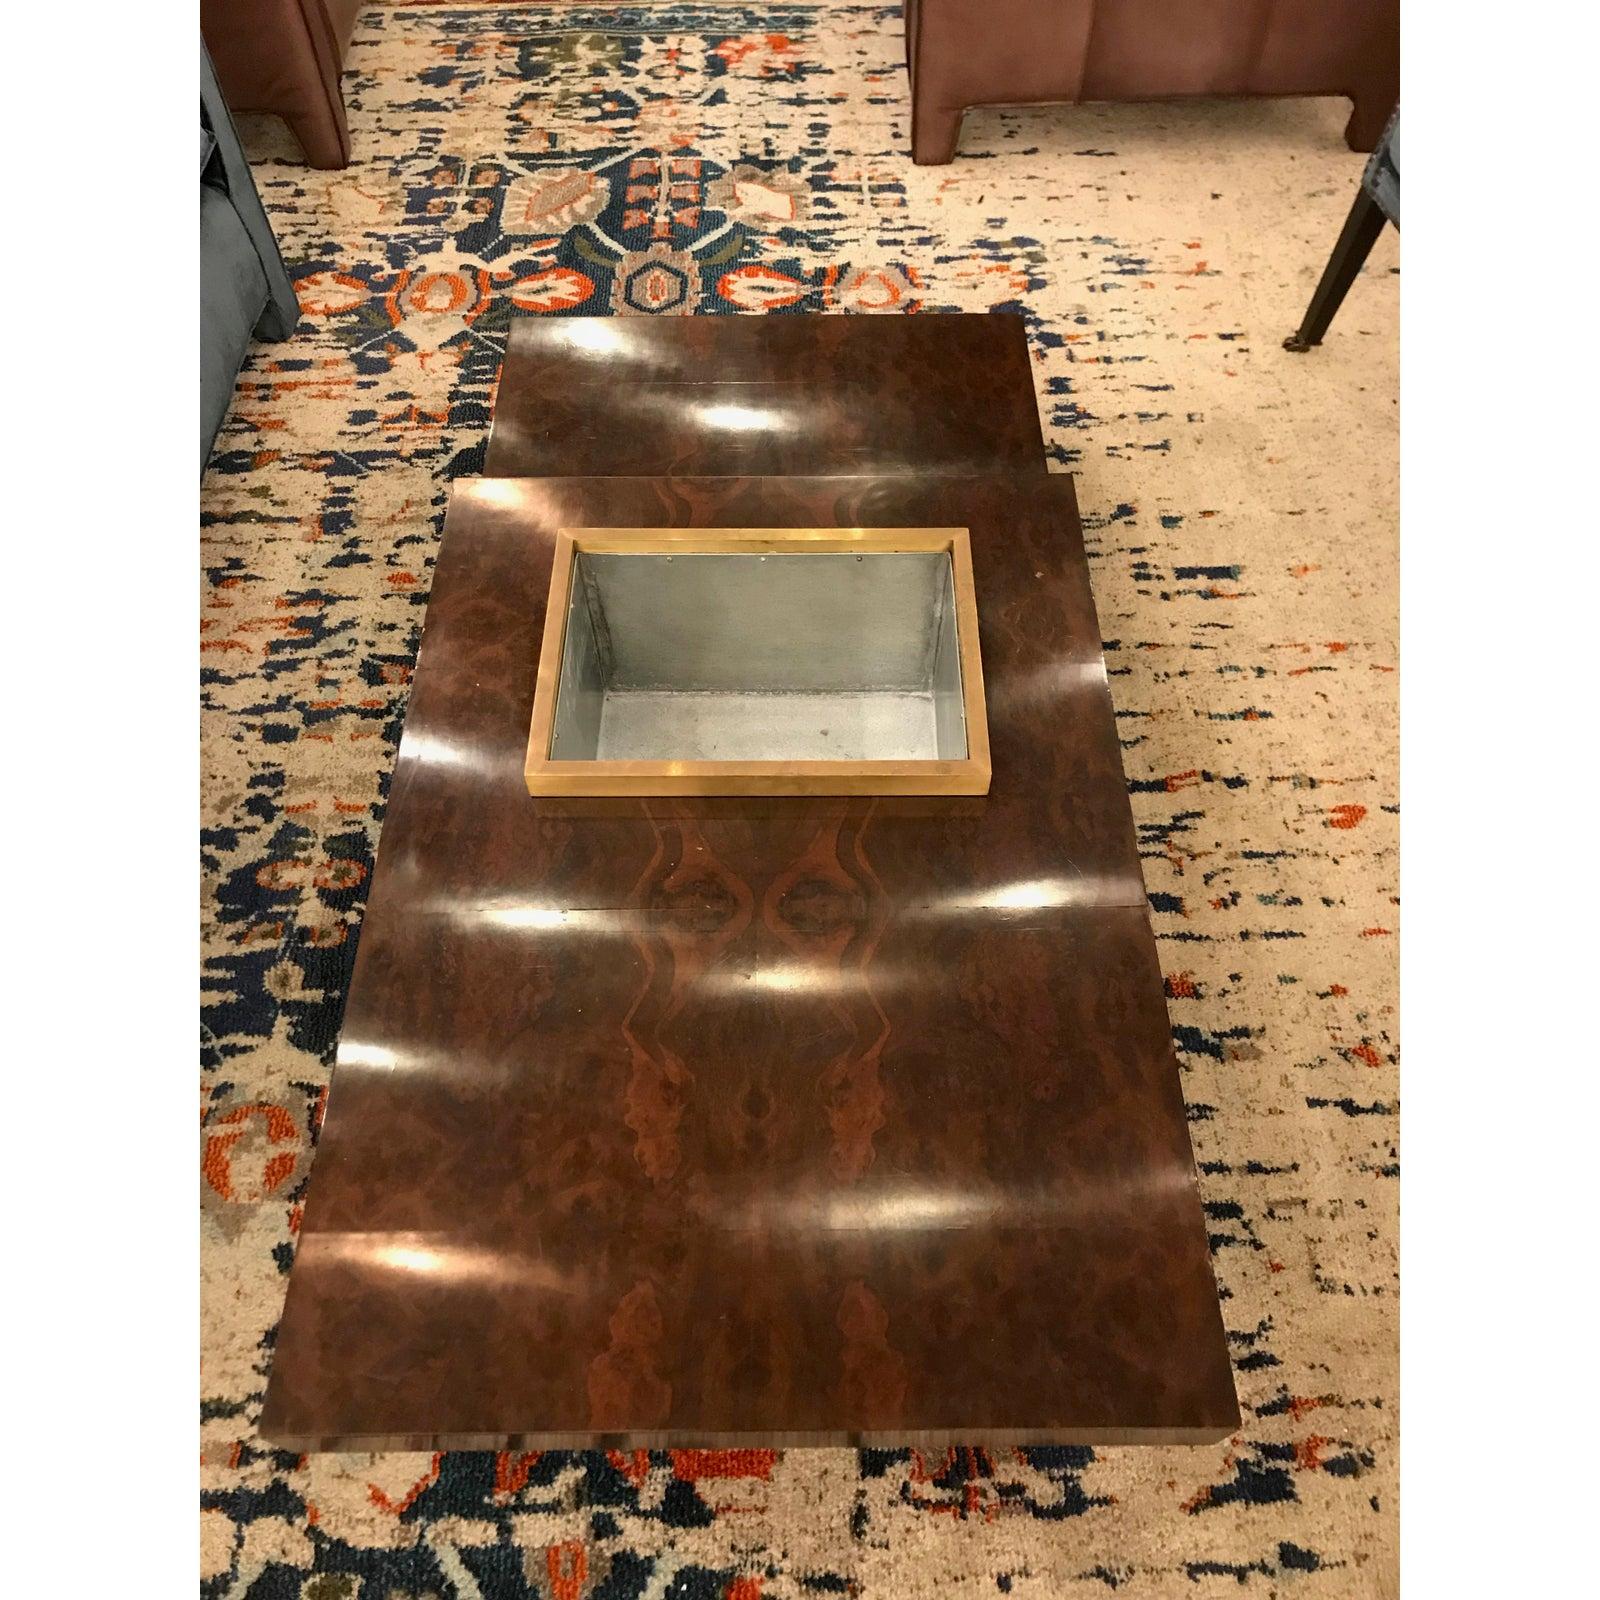 A beautiful Italian, midcentury burl wood coffee table with a dark satin finish. This rectangular coffee tables features a built in planter with a brass edge finish, and makes for a sleek and contemporary feel to any room. Custom designed by San